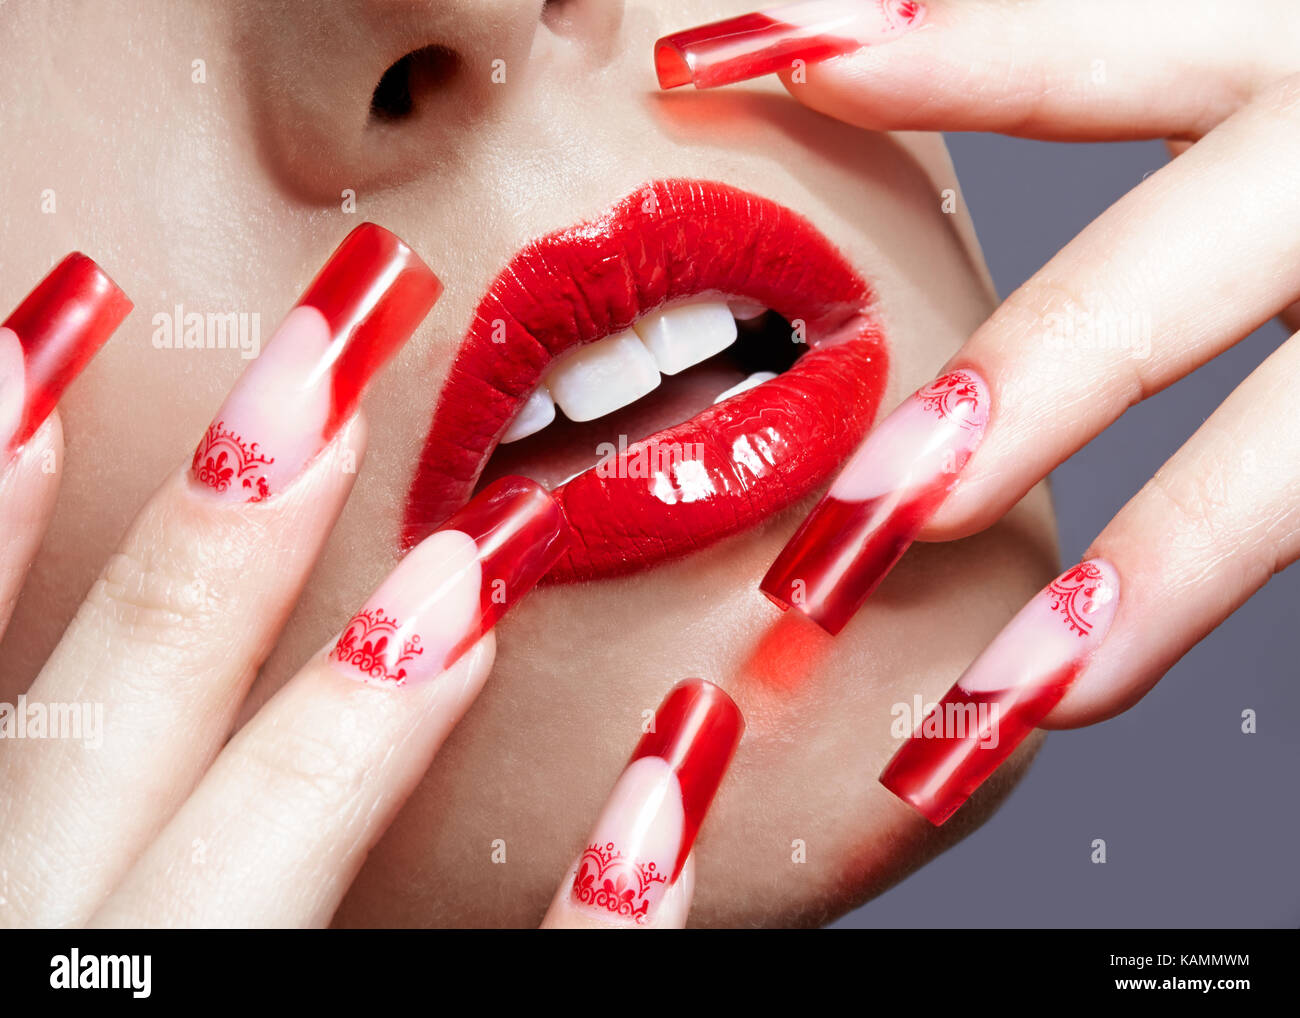 Doigts avec red french manucure ongles en acrylique et paiting Photo Stock  - Alamy